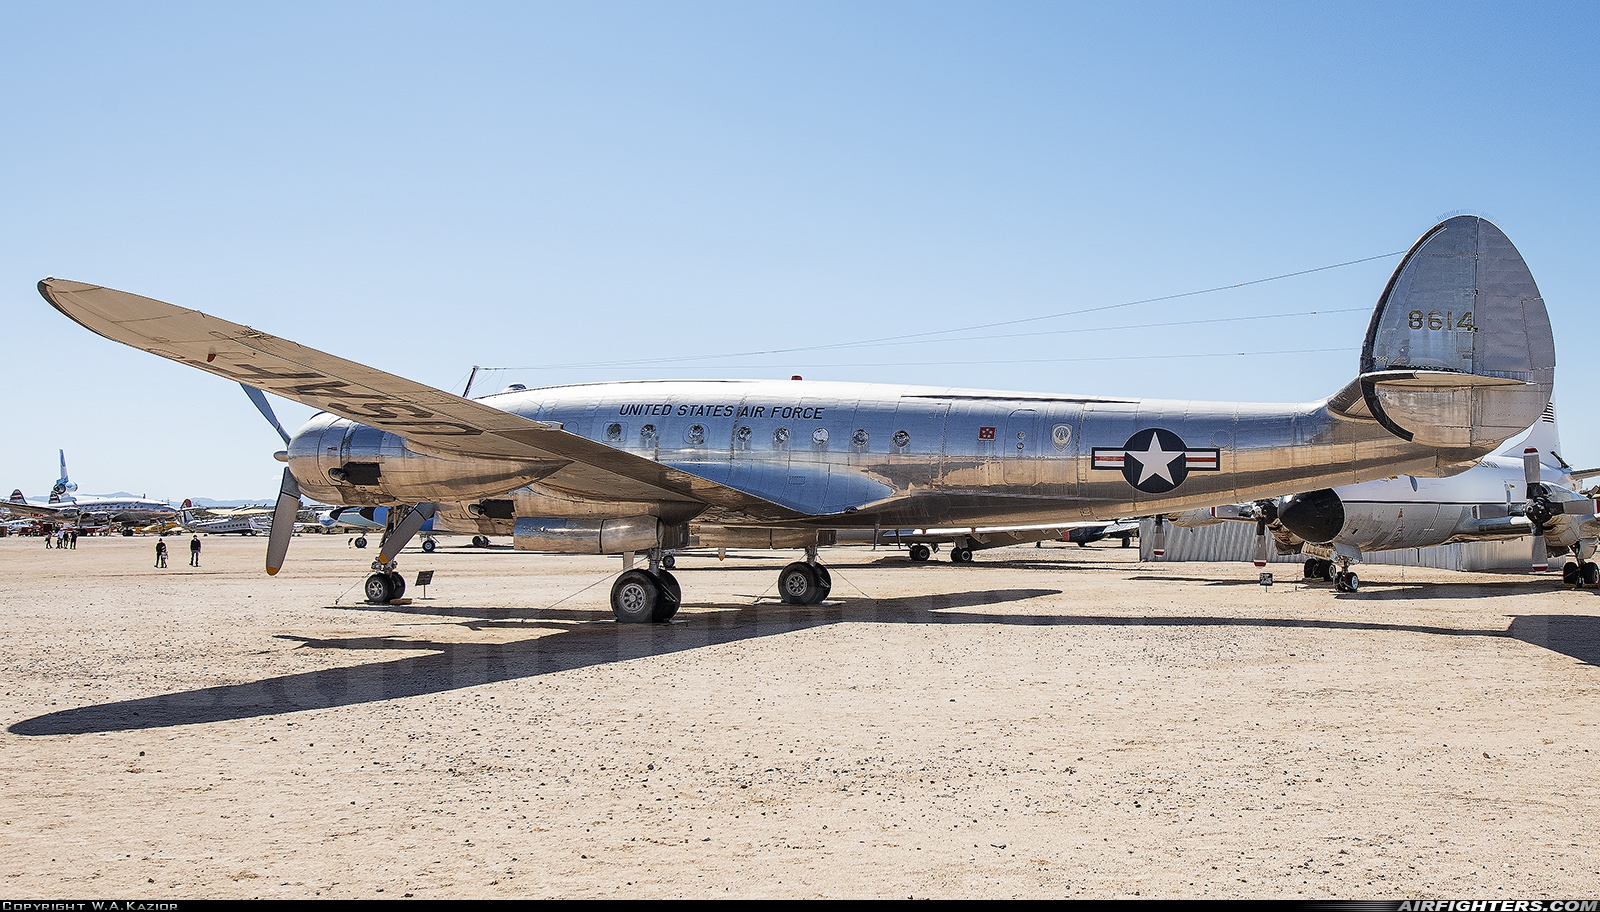 USA - Air Force Lockheed VC-121A Constellation (L-749) 48-0614 at Tucson - Pima Air and Space Museum, USA